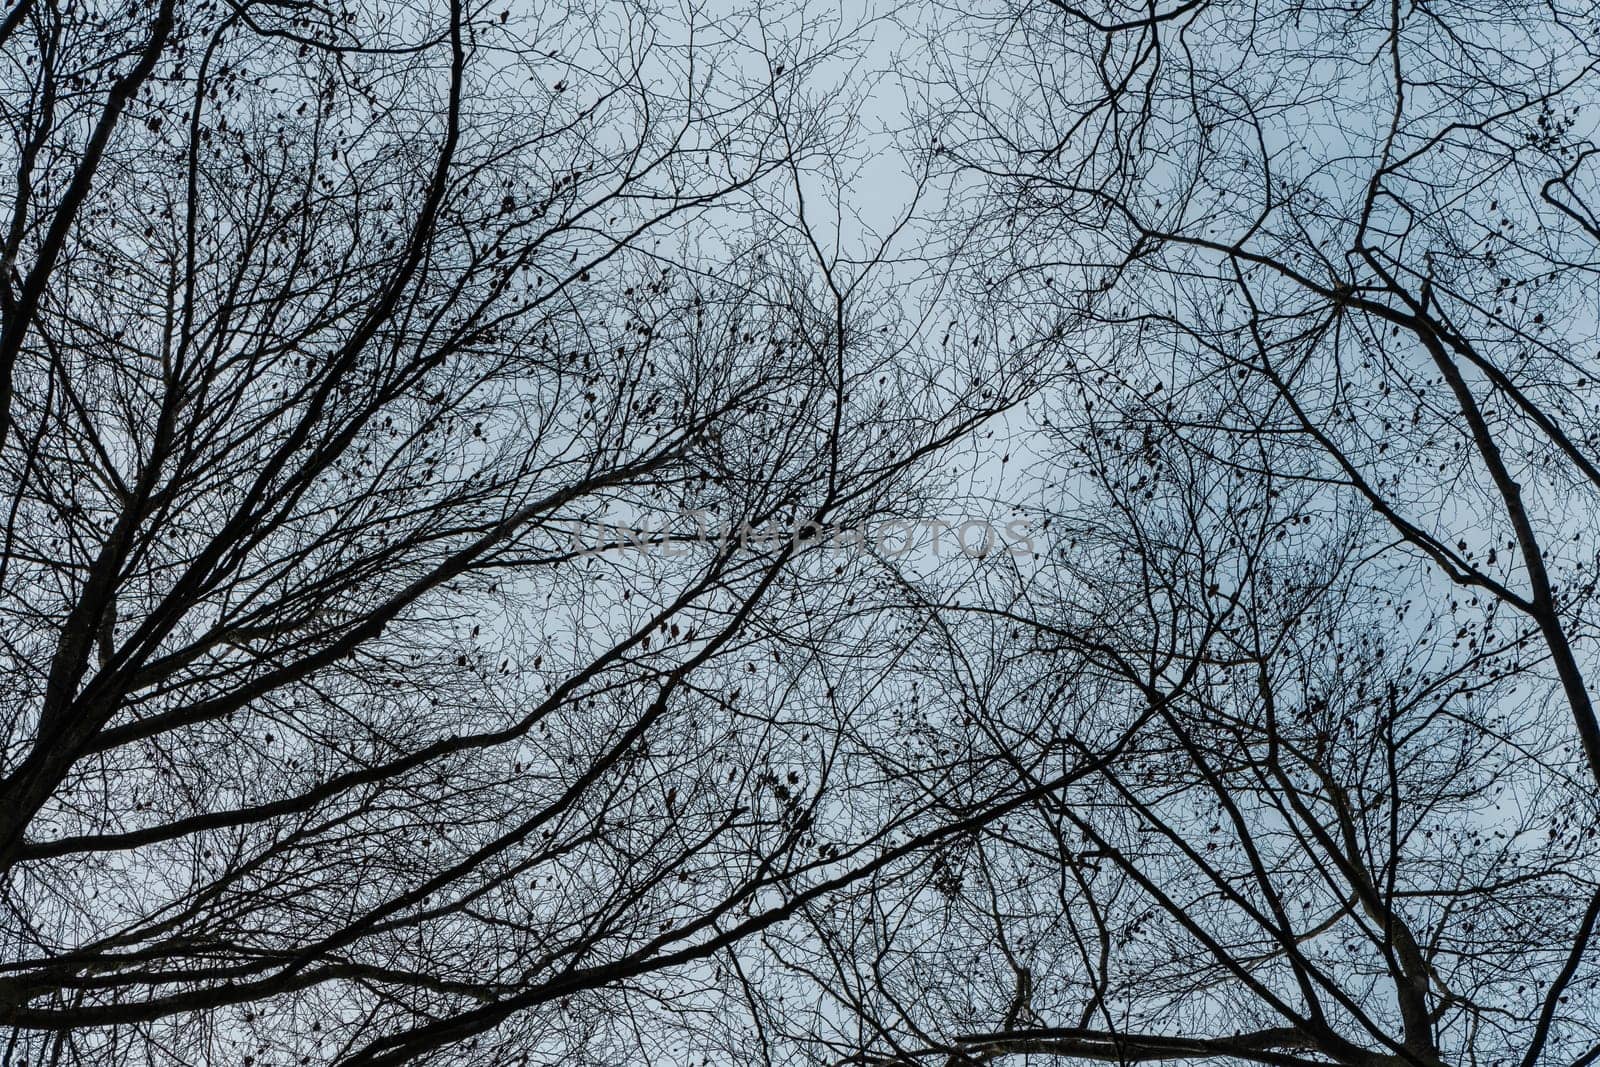 A low angle of bare branches of trees against the cloudy sky in a forest